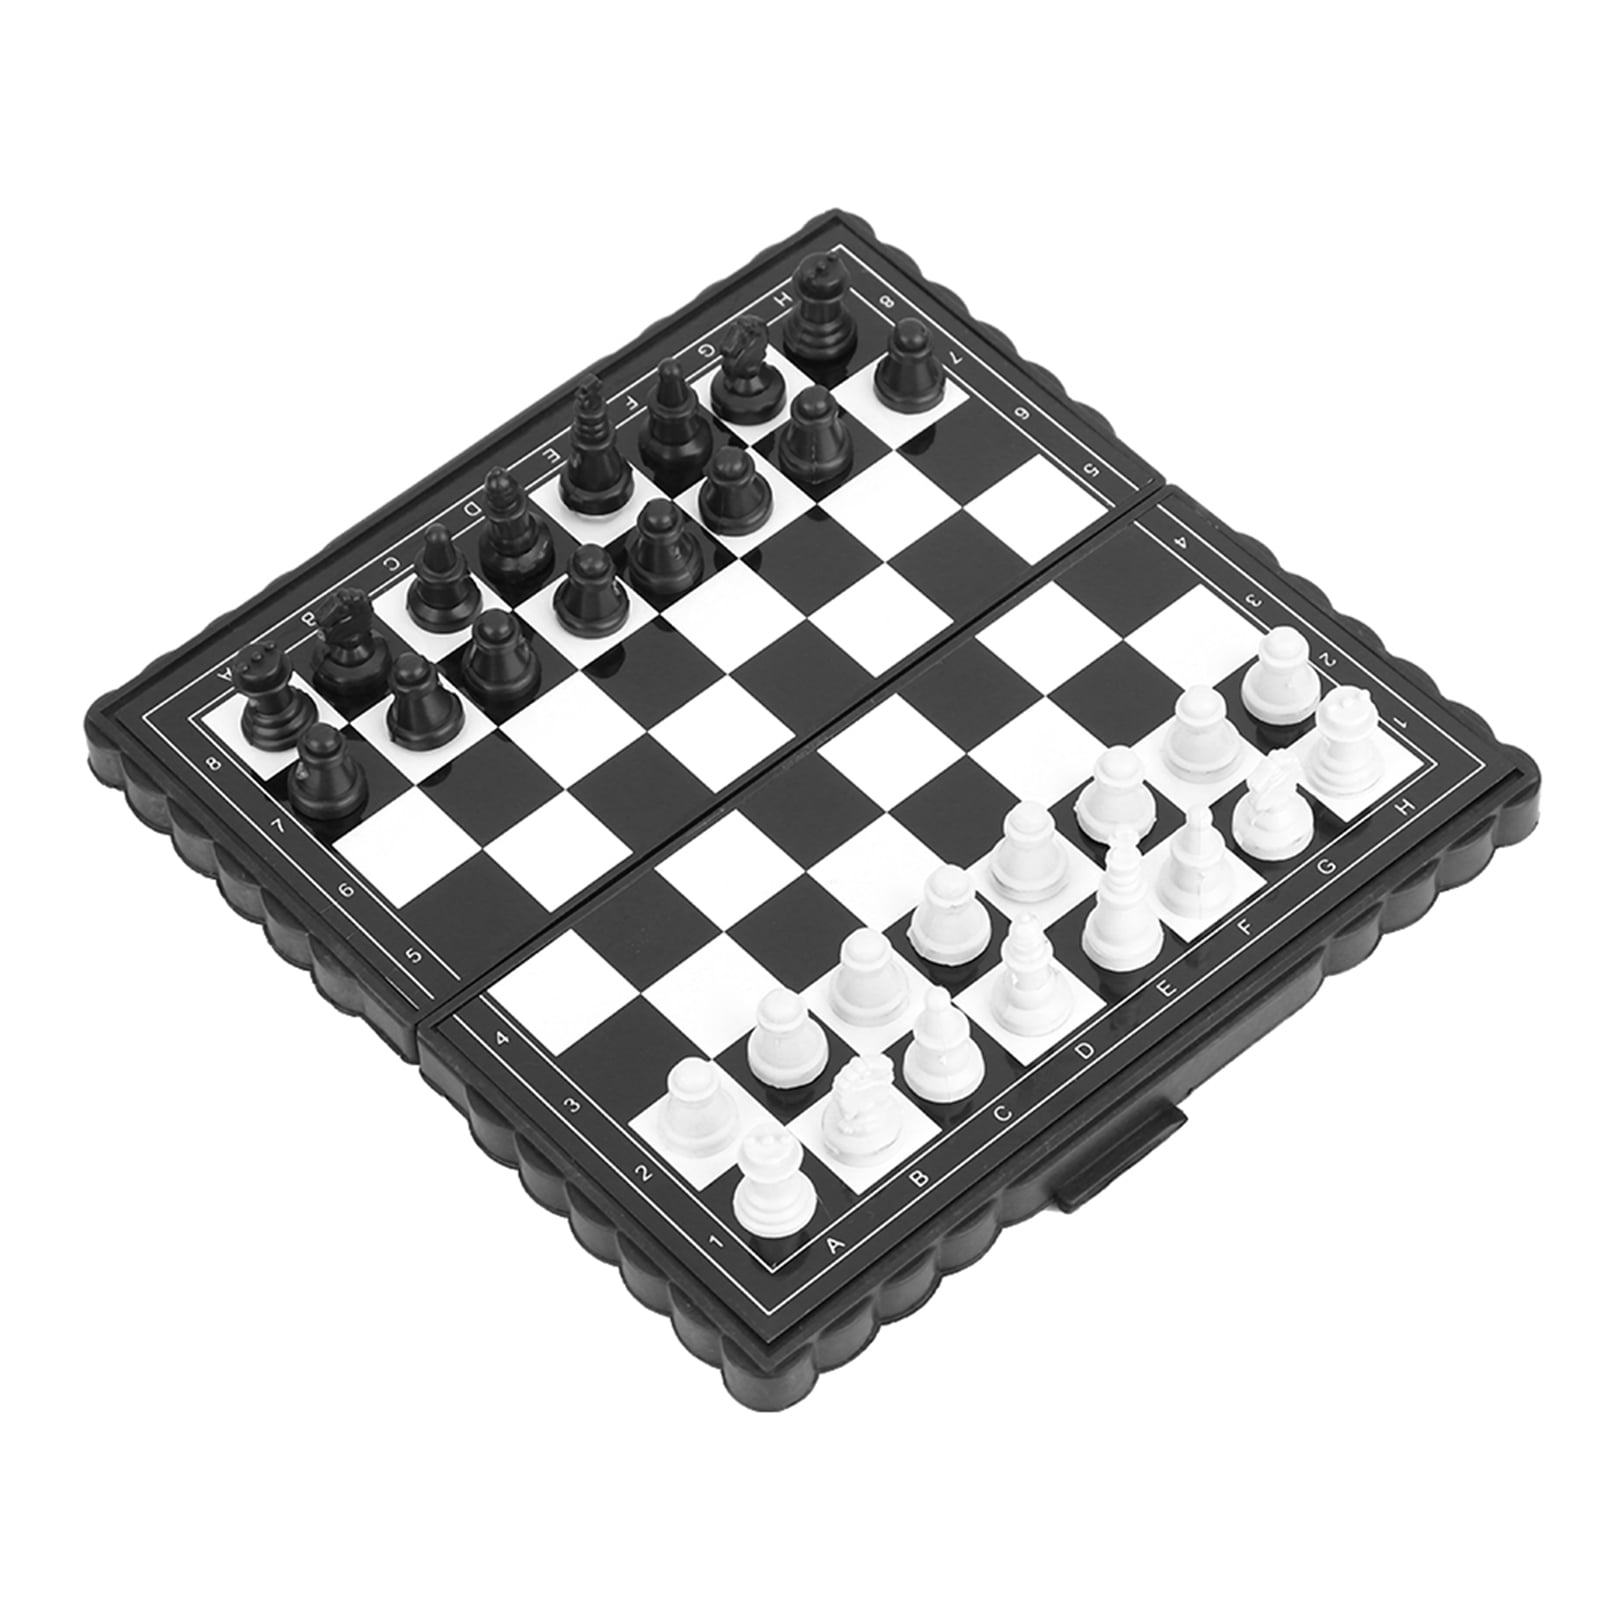 Portable Folding Chessboards Magnetic Chess Sets Games for Party Family Activity 8852080398599 